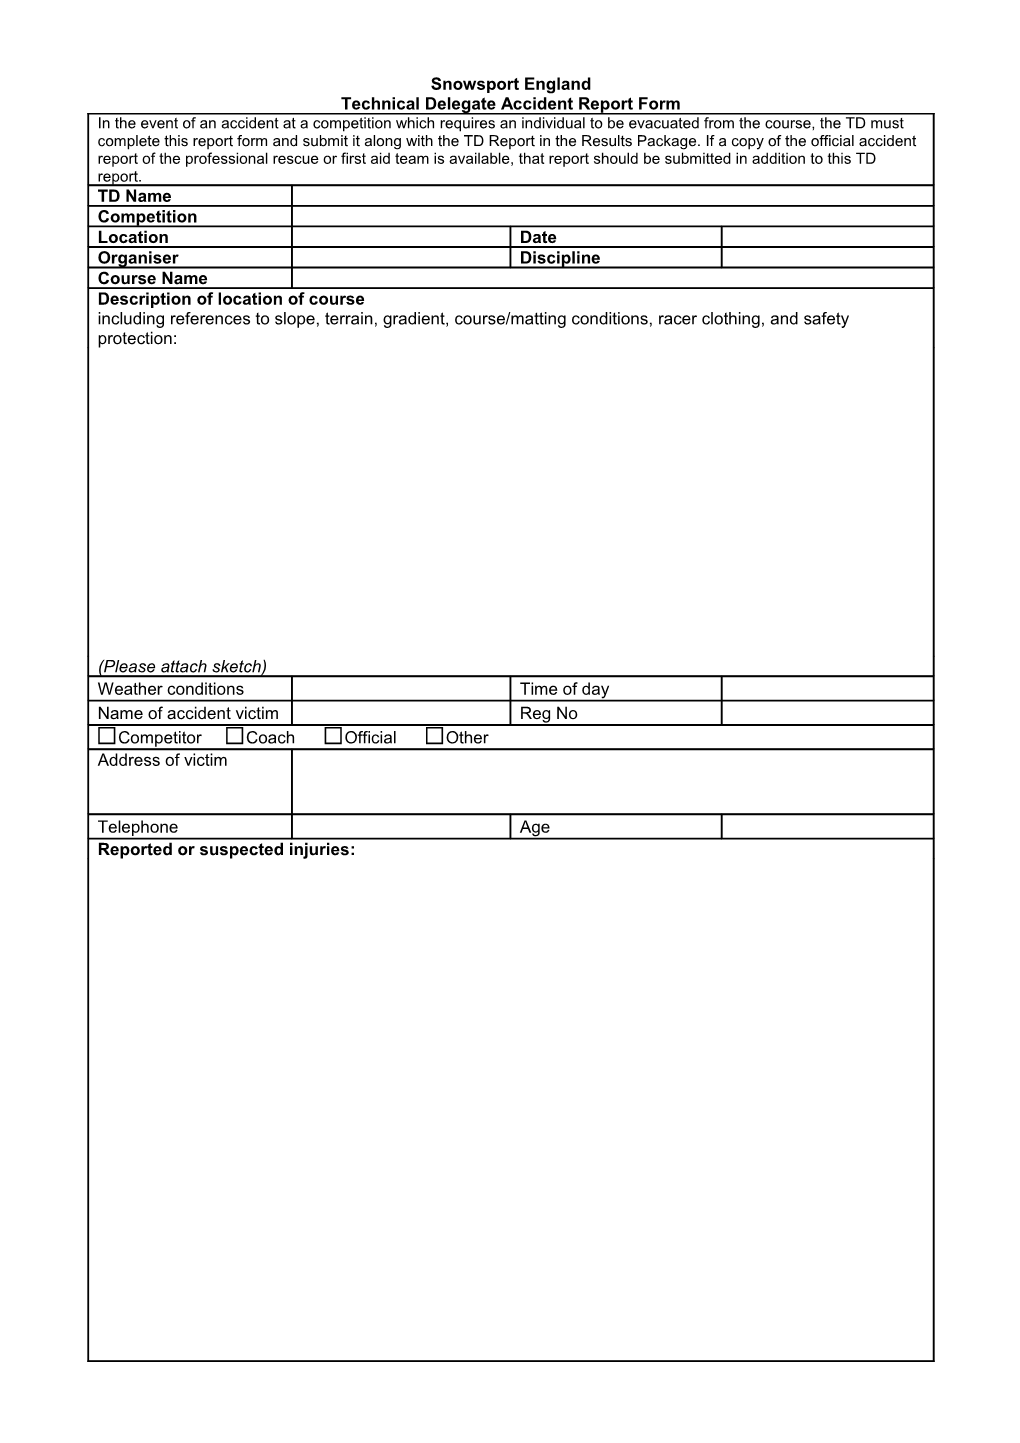 Technical Delegate Accident Report Form